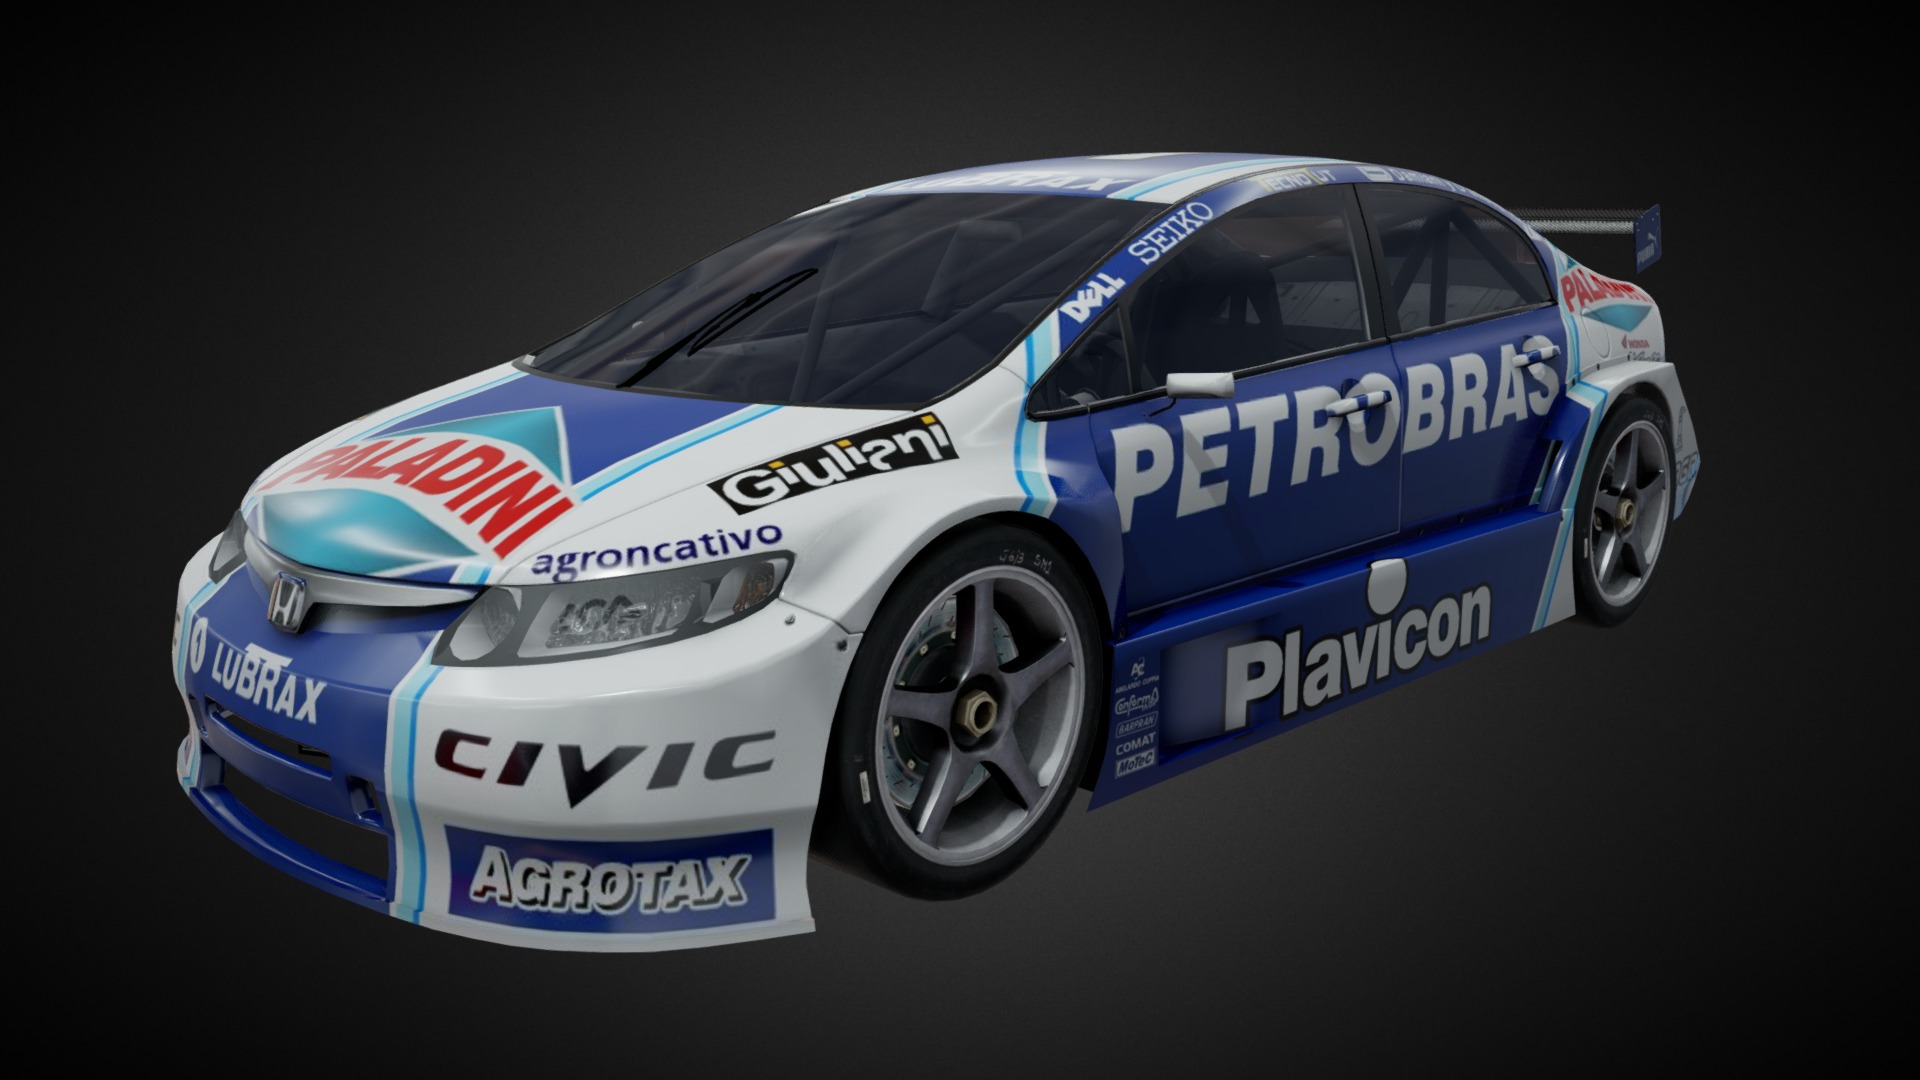 3D model Honda Civic Turing Race Car - This is a 3D model of the Honda Civic Turing Race Car. The 3D model is about a blue and white race car.